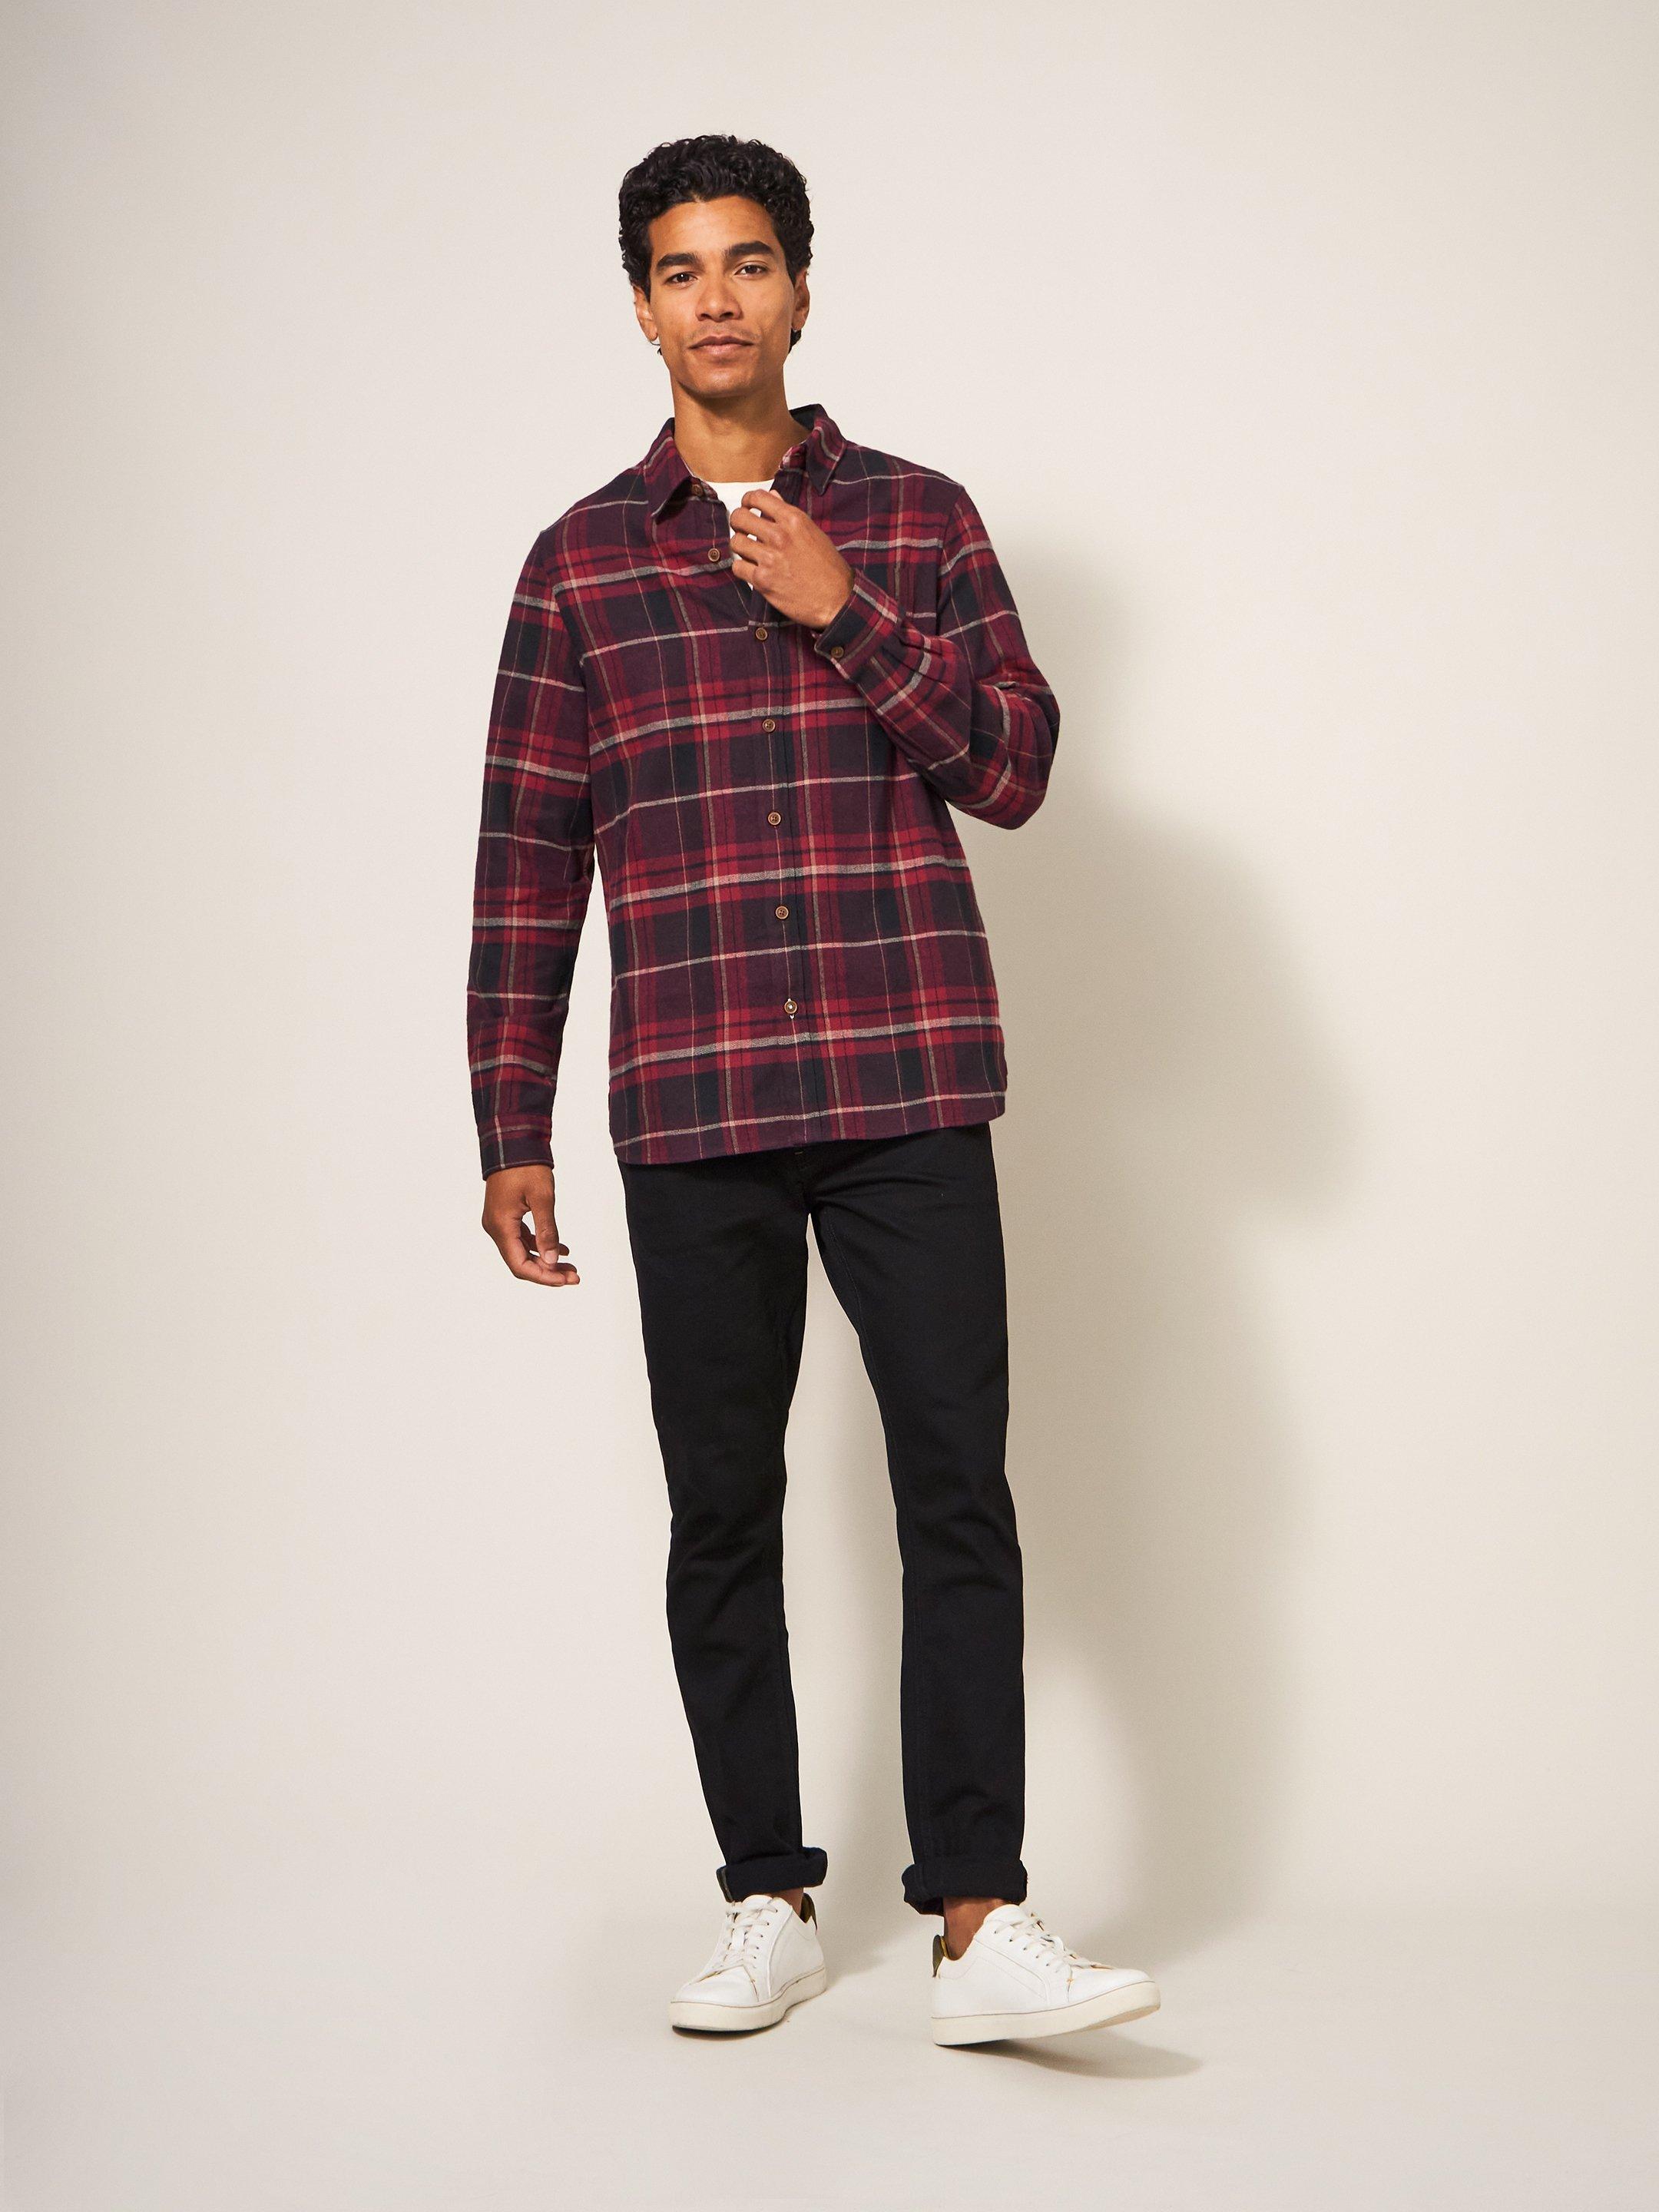 Moxley Brushed Check Shirt